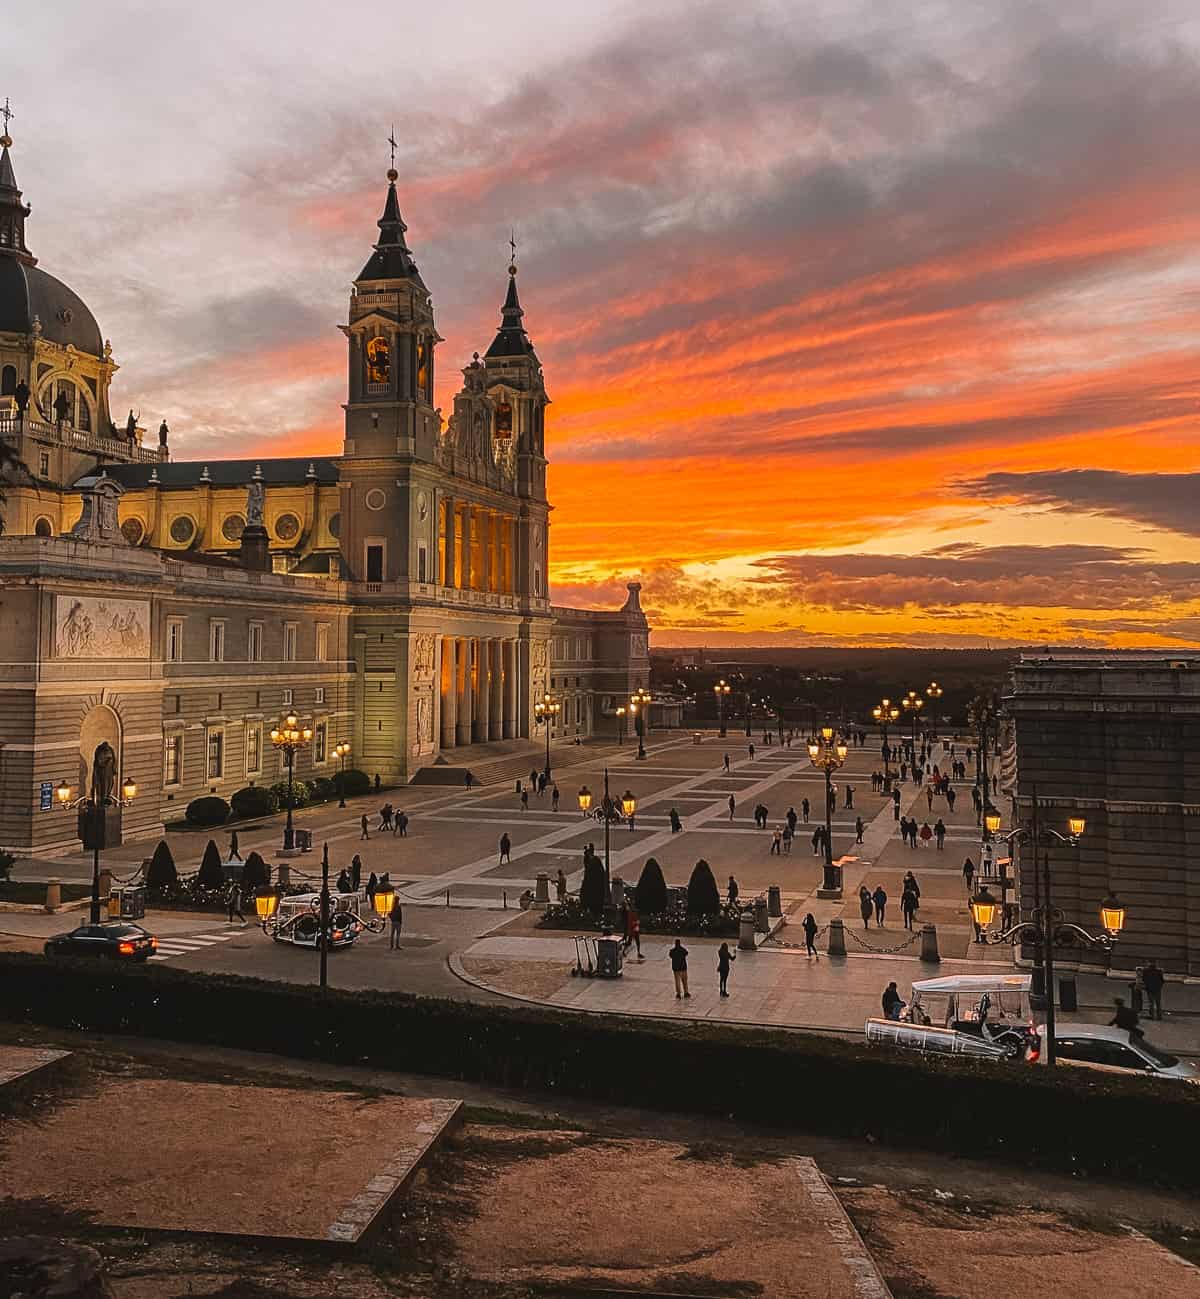 A beautiful cathedral in spain with an orange and red sunset